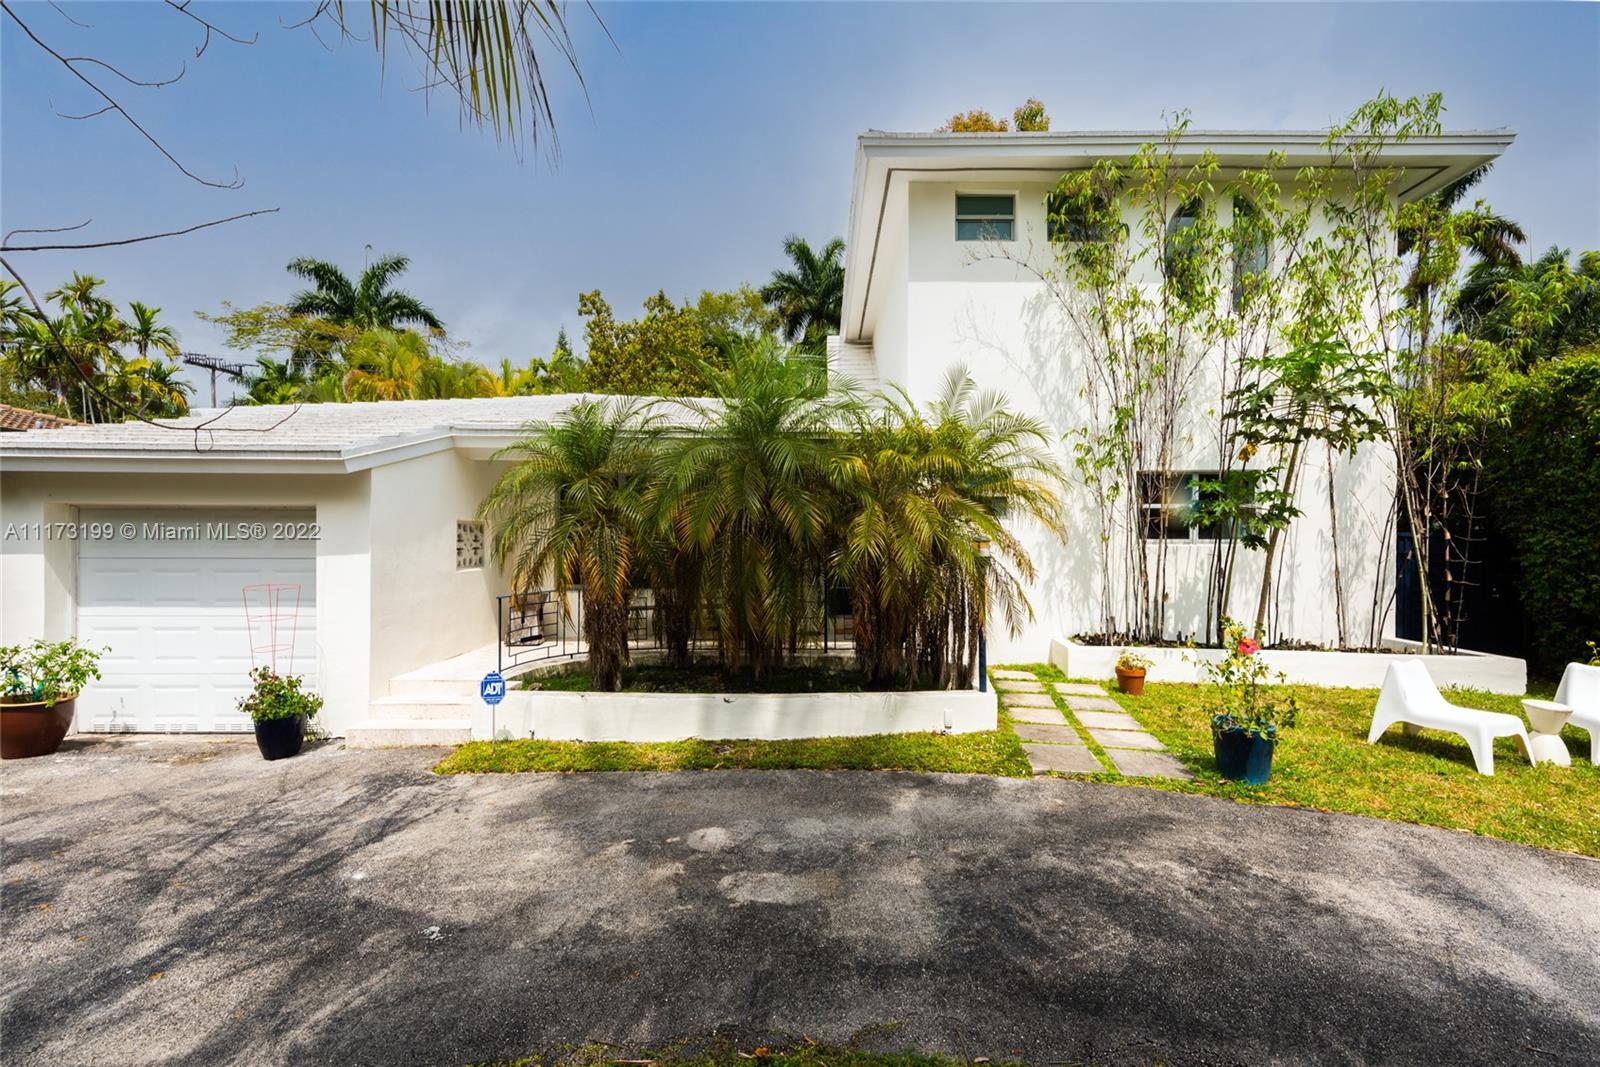 Spacious, bright and super-chic 4-bedroom 4-bath Mid-Century home surrounded by green trees and bamboo in the heart of gated Morningside, the hottest neighborhood of Miami's Upper Eastside and minutes from the Design District, Downtown, and Wynwood. Steps from a large park and Biscayne Bay. Open floorplan with wood and terrazzo flooring, designer Italian kitchen and high-end appliances for entertaining in style. Lots of impact windows unite interior and exterior. Two master suites, bonus room could be fifth bedroom, prep kitchen, office. Smashing upstairs master suite with park and bay views, luxurious spa-like bath.